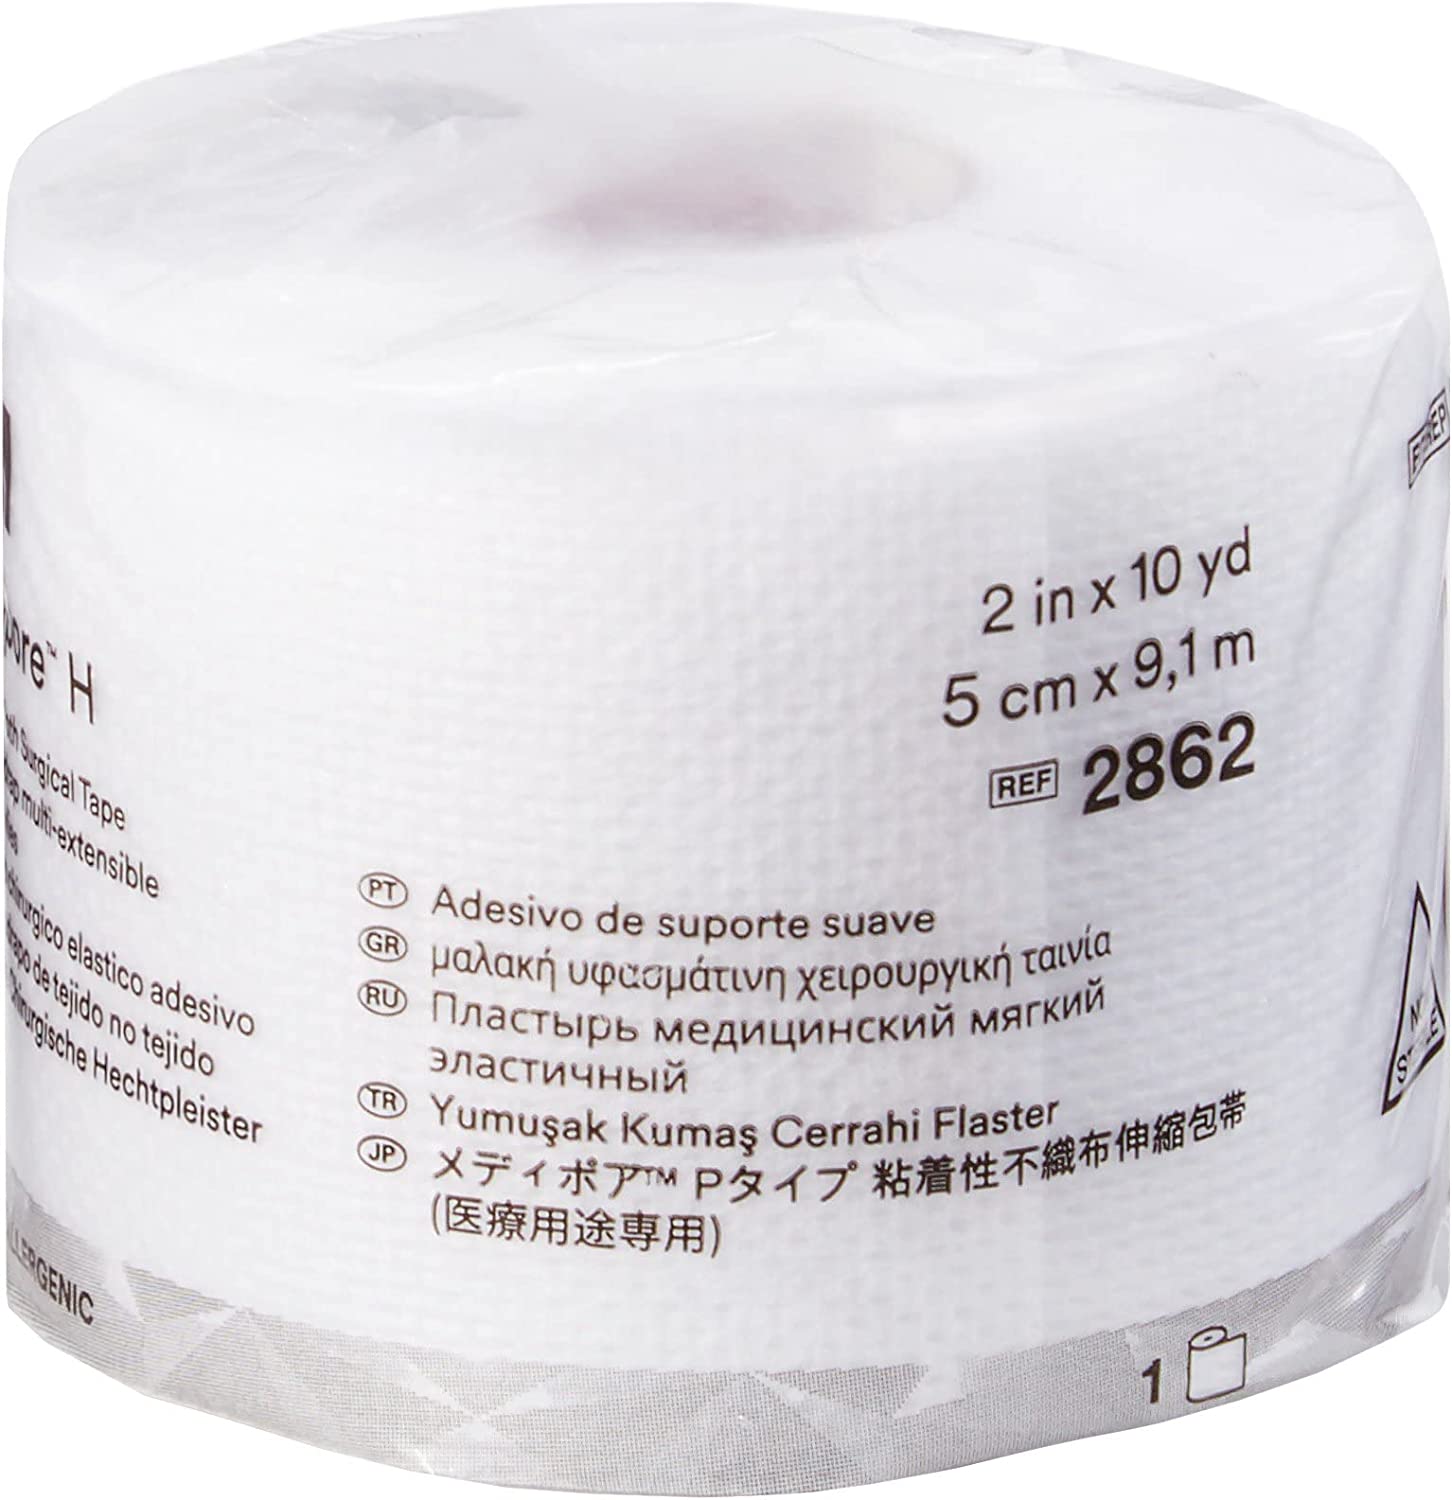 3M Medipore H Soft Cloth Surgical Tape, NonSterile